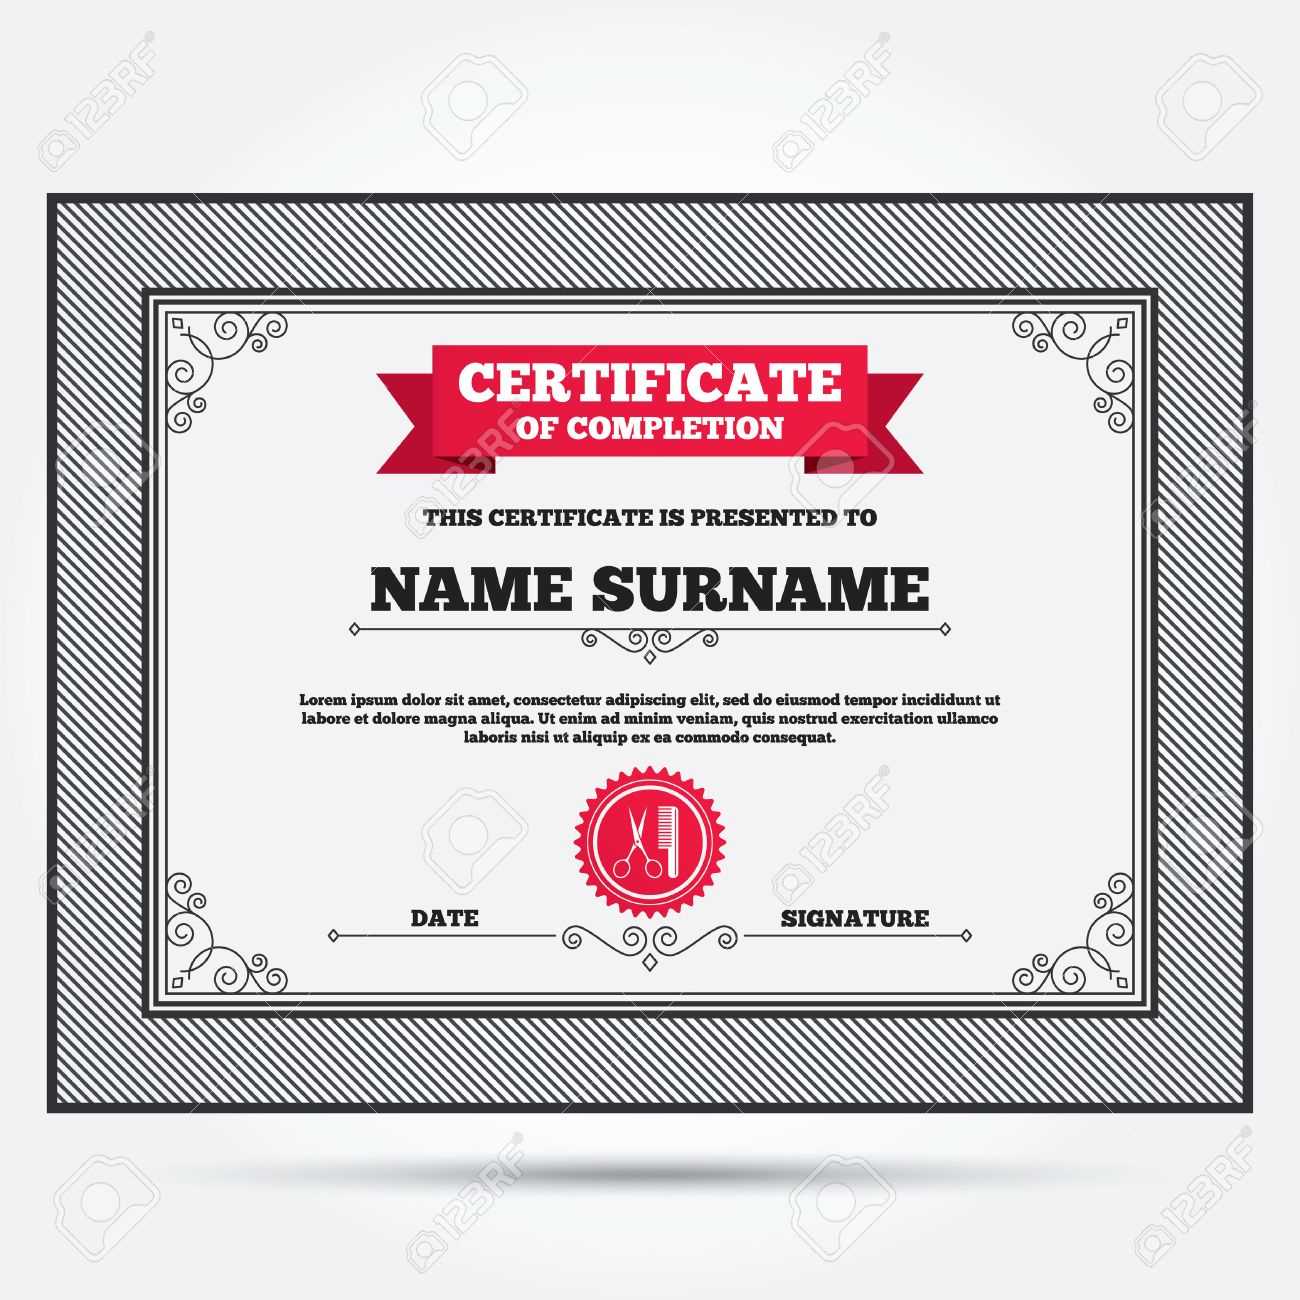 Certificate Of Completion. Comb Hair With Scissors Sign Icon In Certificate Of License Template